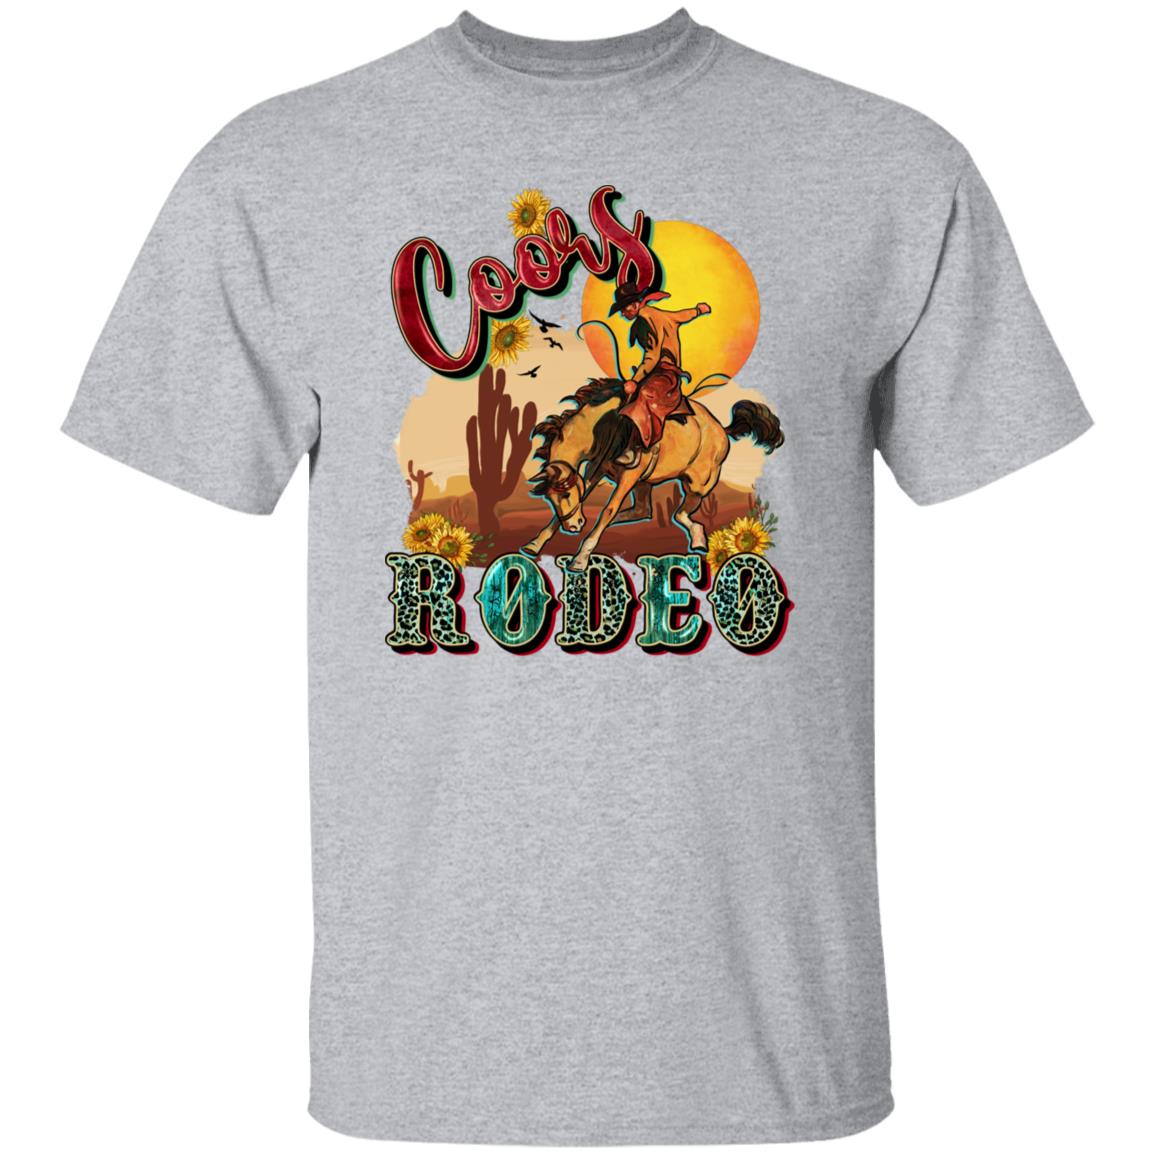 Coors Rodeo T-Shirt Western Texas Rodeo cowboy Unisex tee White Sand Sport Grey-Family-Gift-Planet